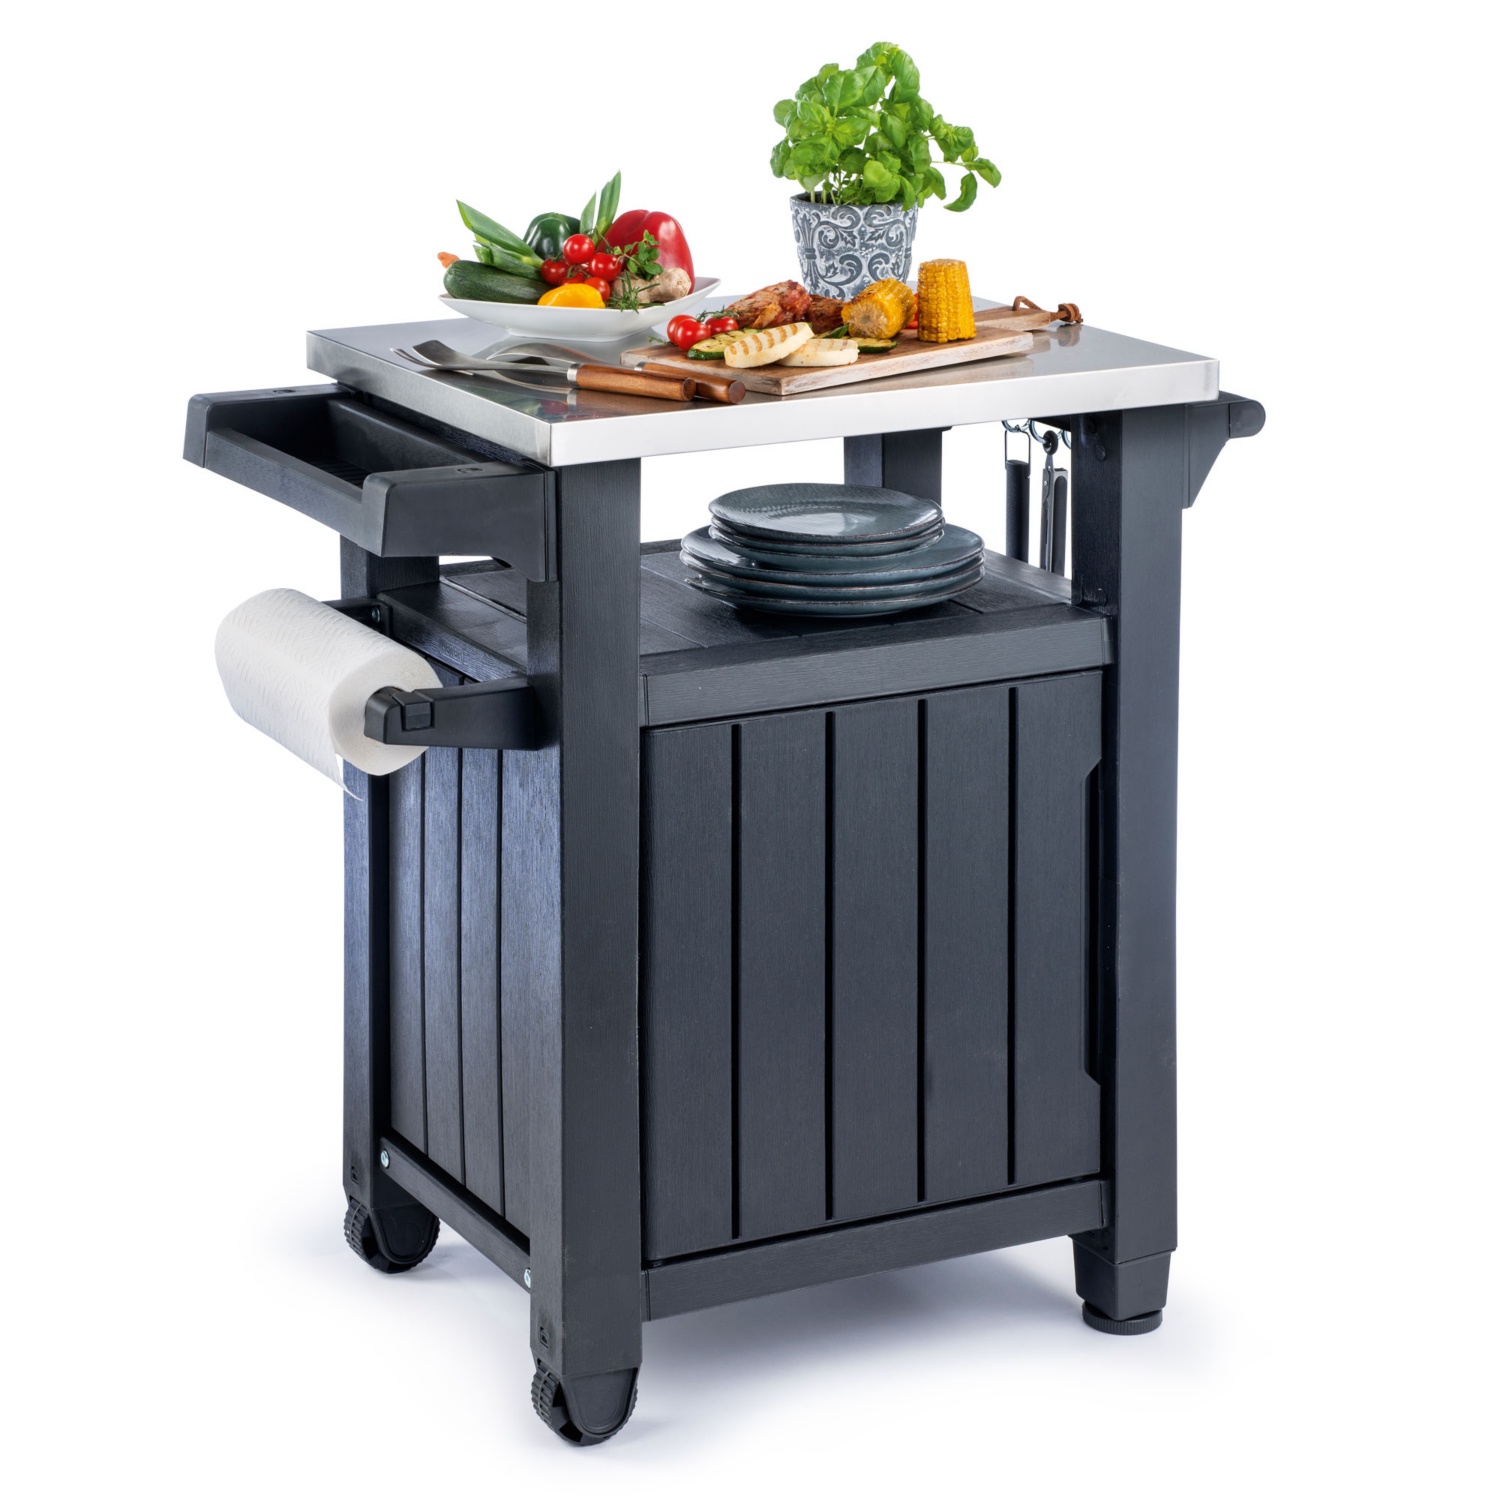 KETER Table d’appoint pour barbecue